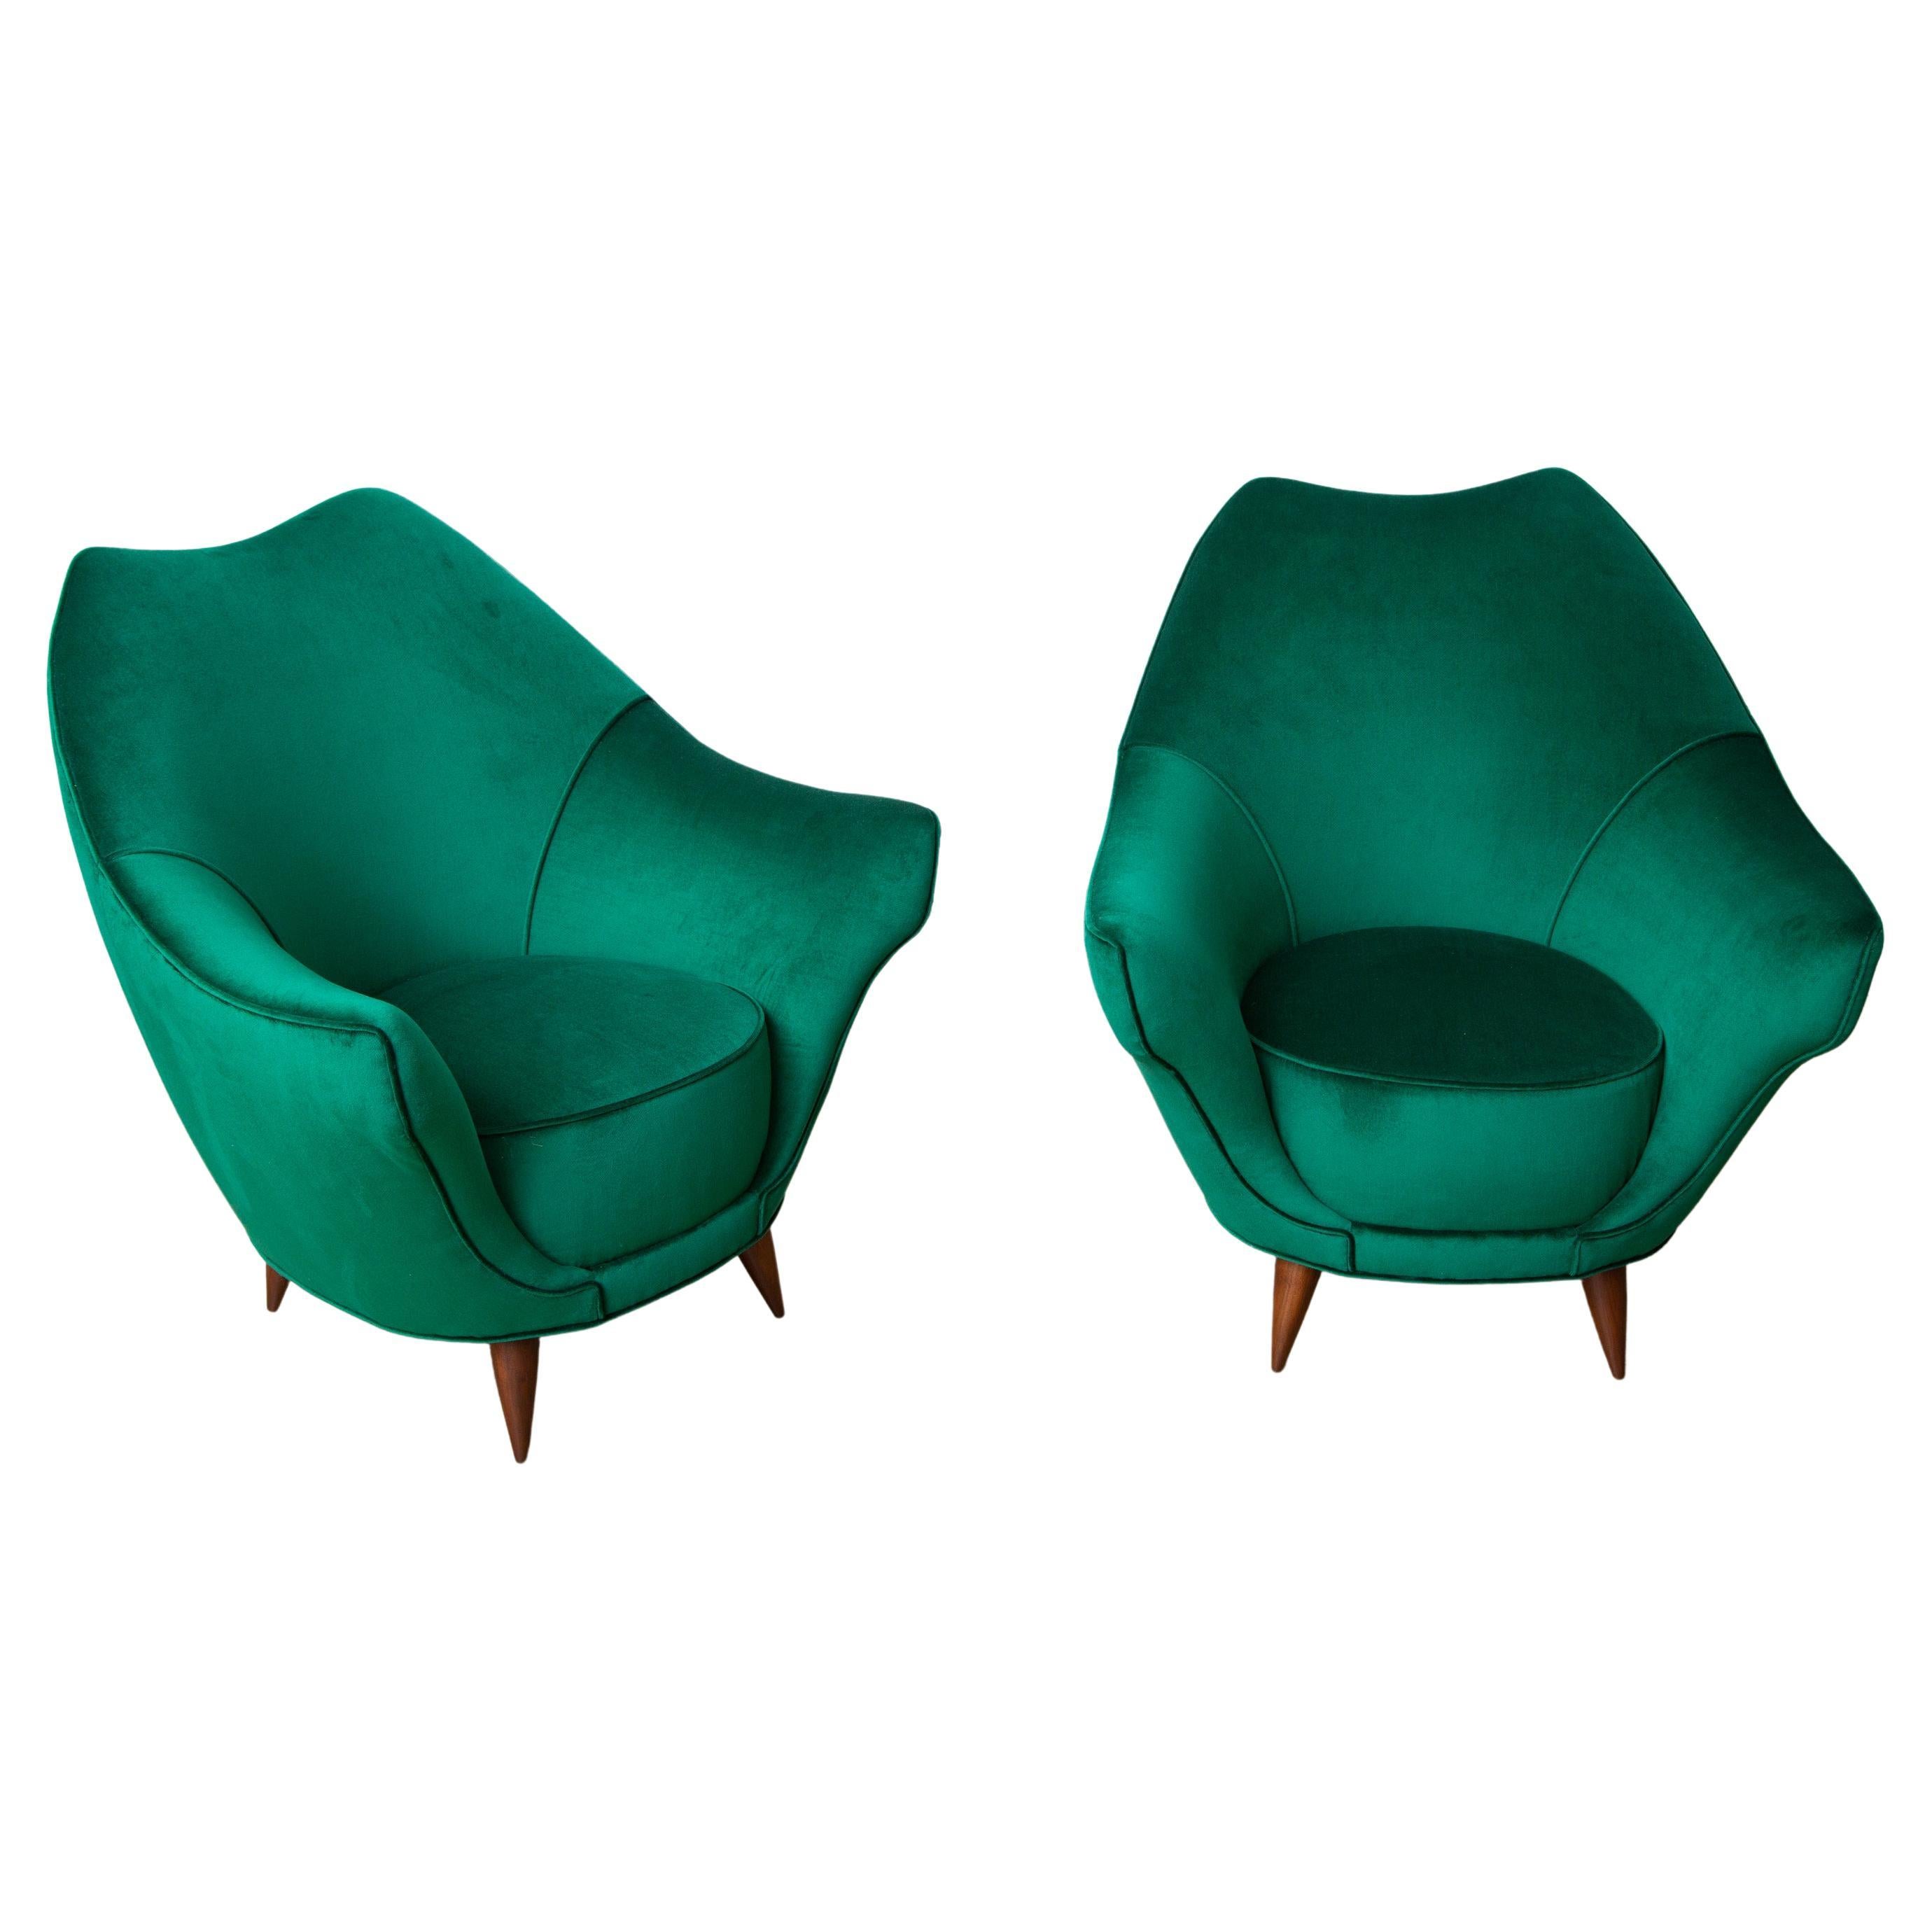 Pair of Mid-Century Modern Italian Lounge Chairs in Emerald Green Velvet For Sale